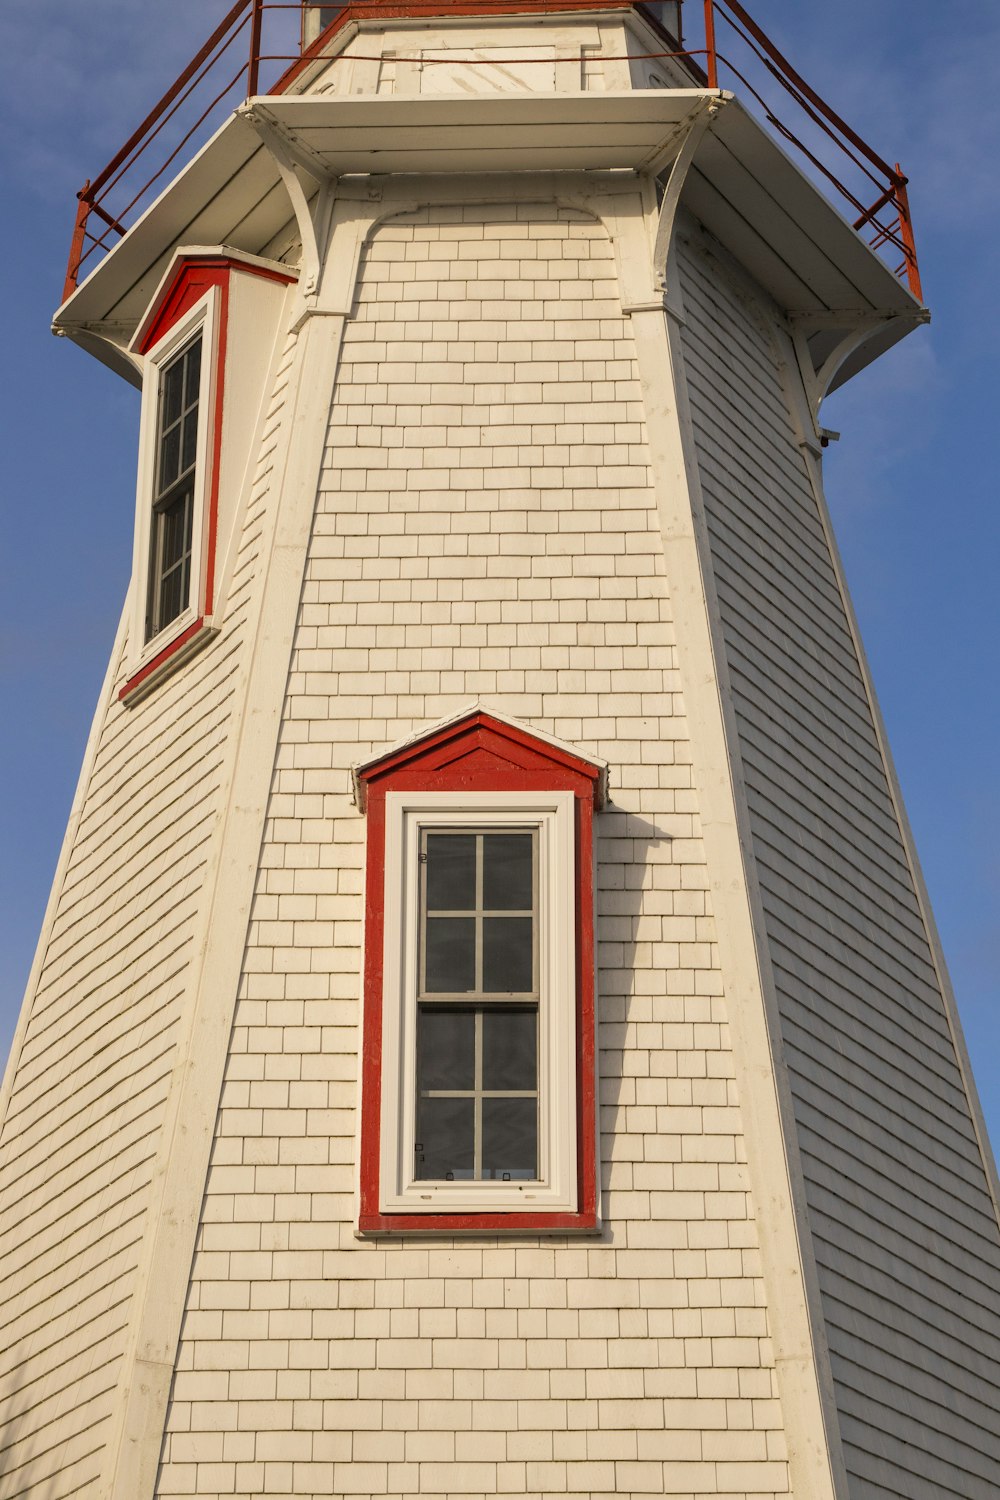 a white and red lighthouse with a red top